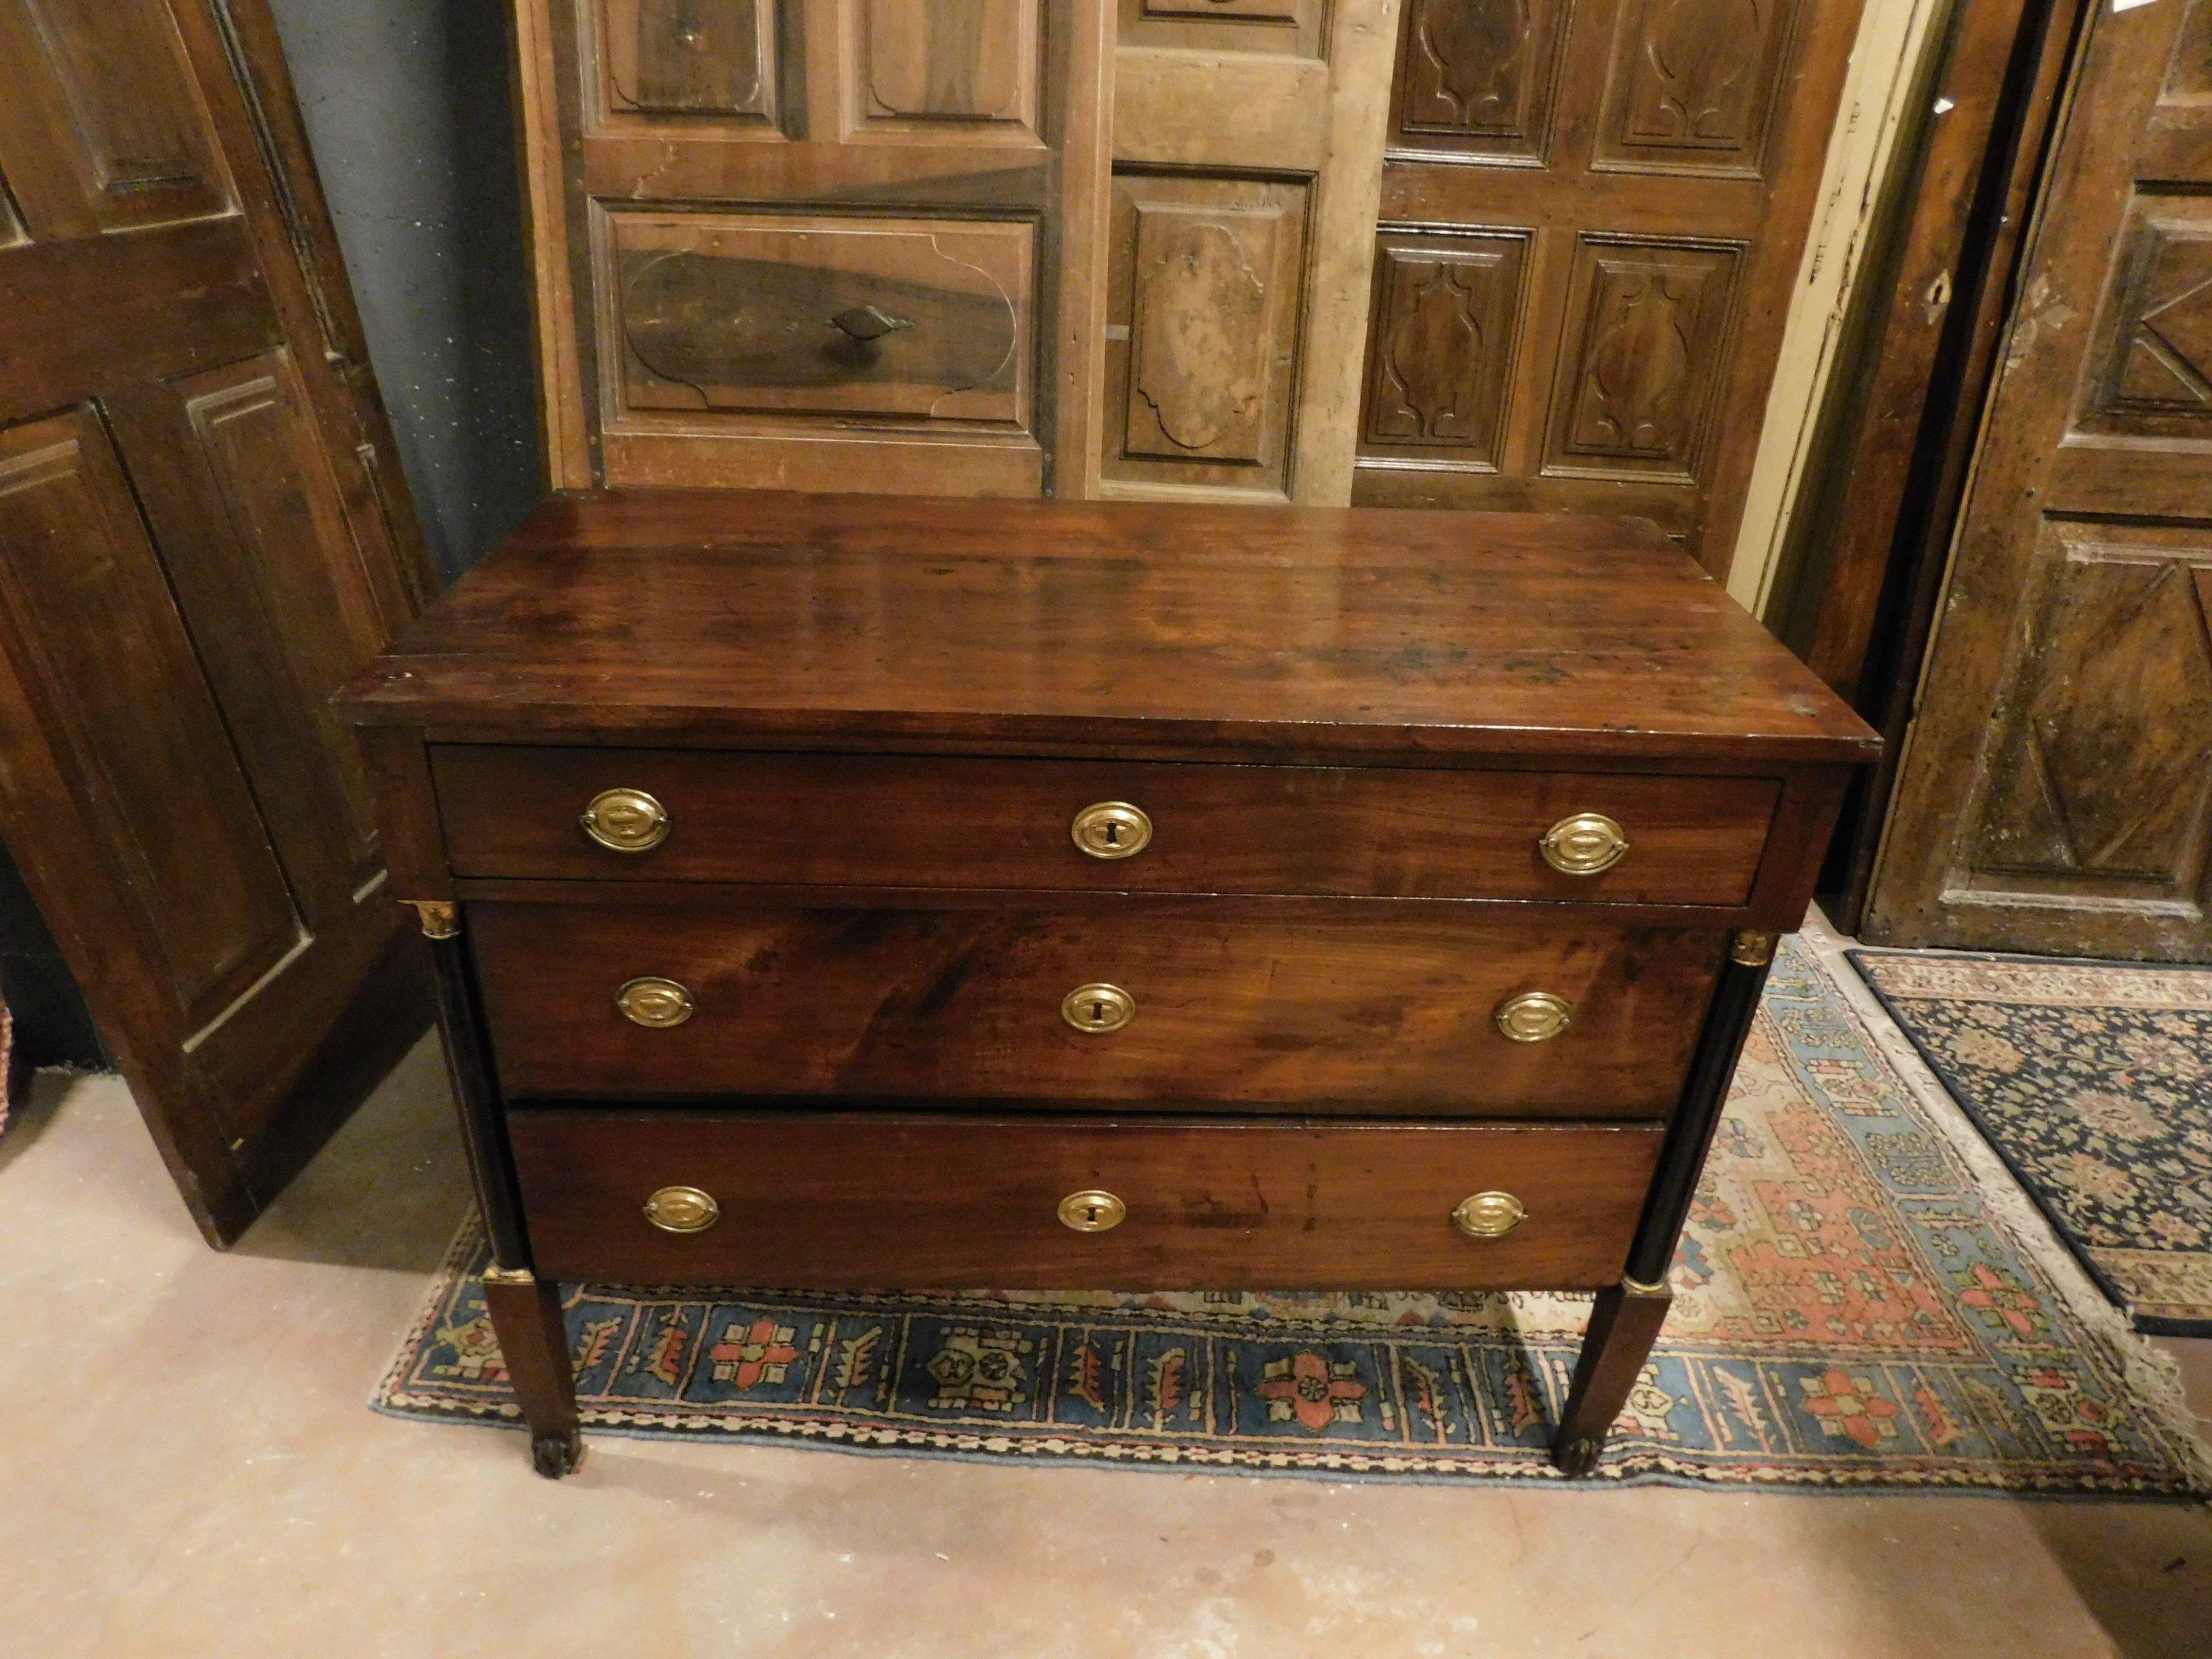 Hand-Carved Antique Empire Style Chest of Drawers in Walnut with Columns, Early 19th Century